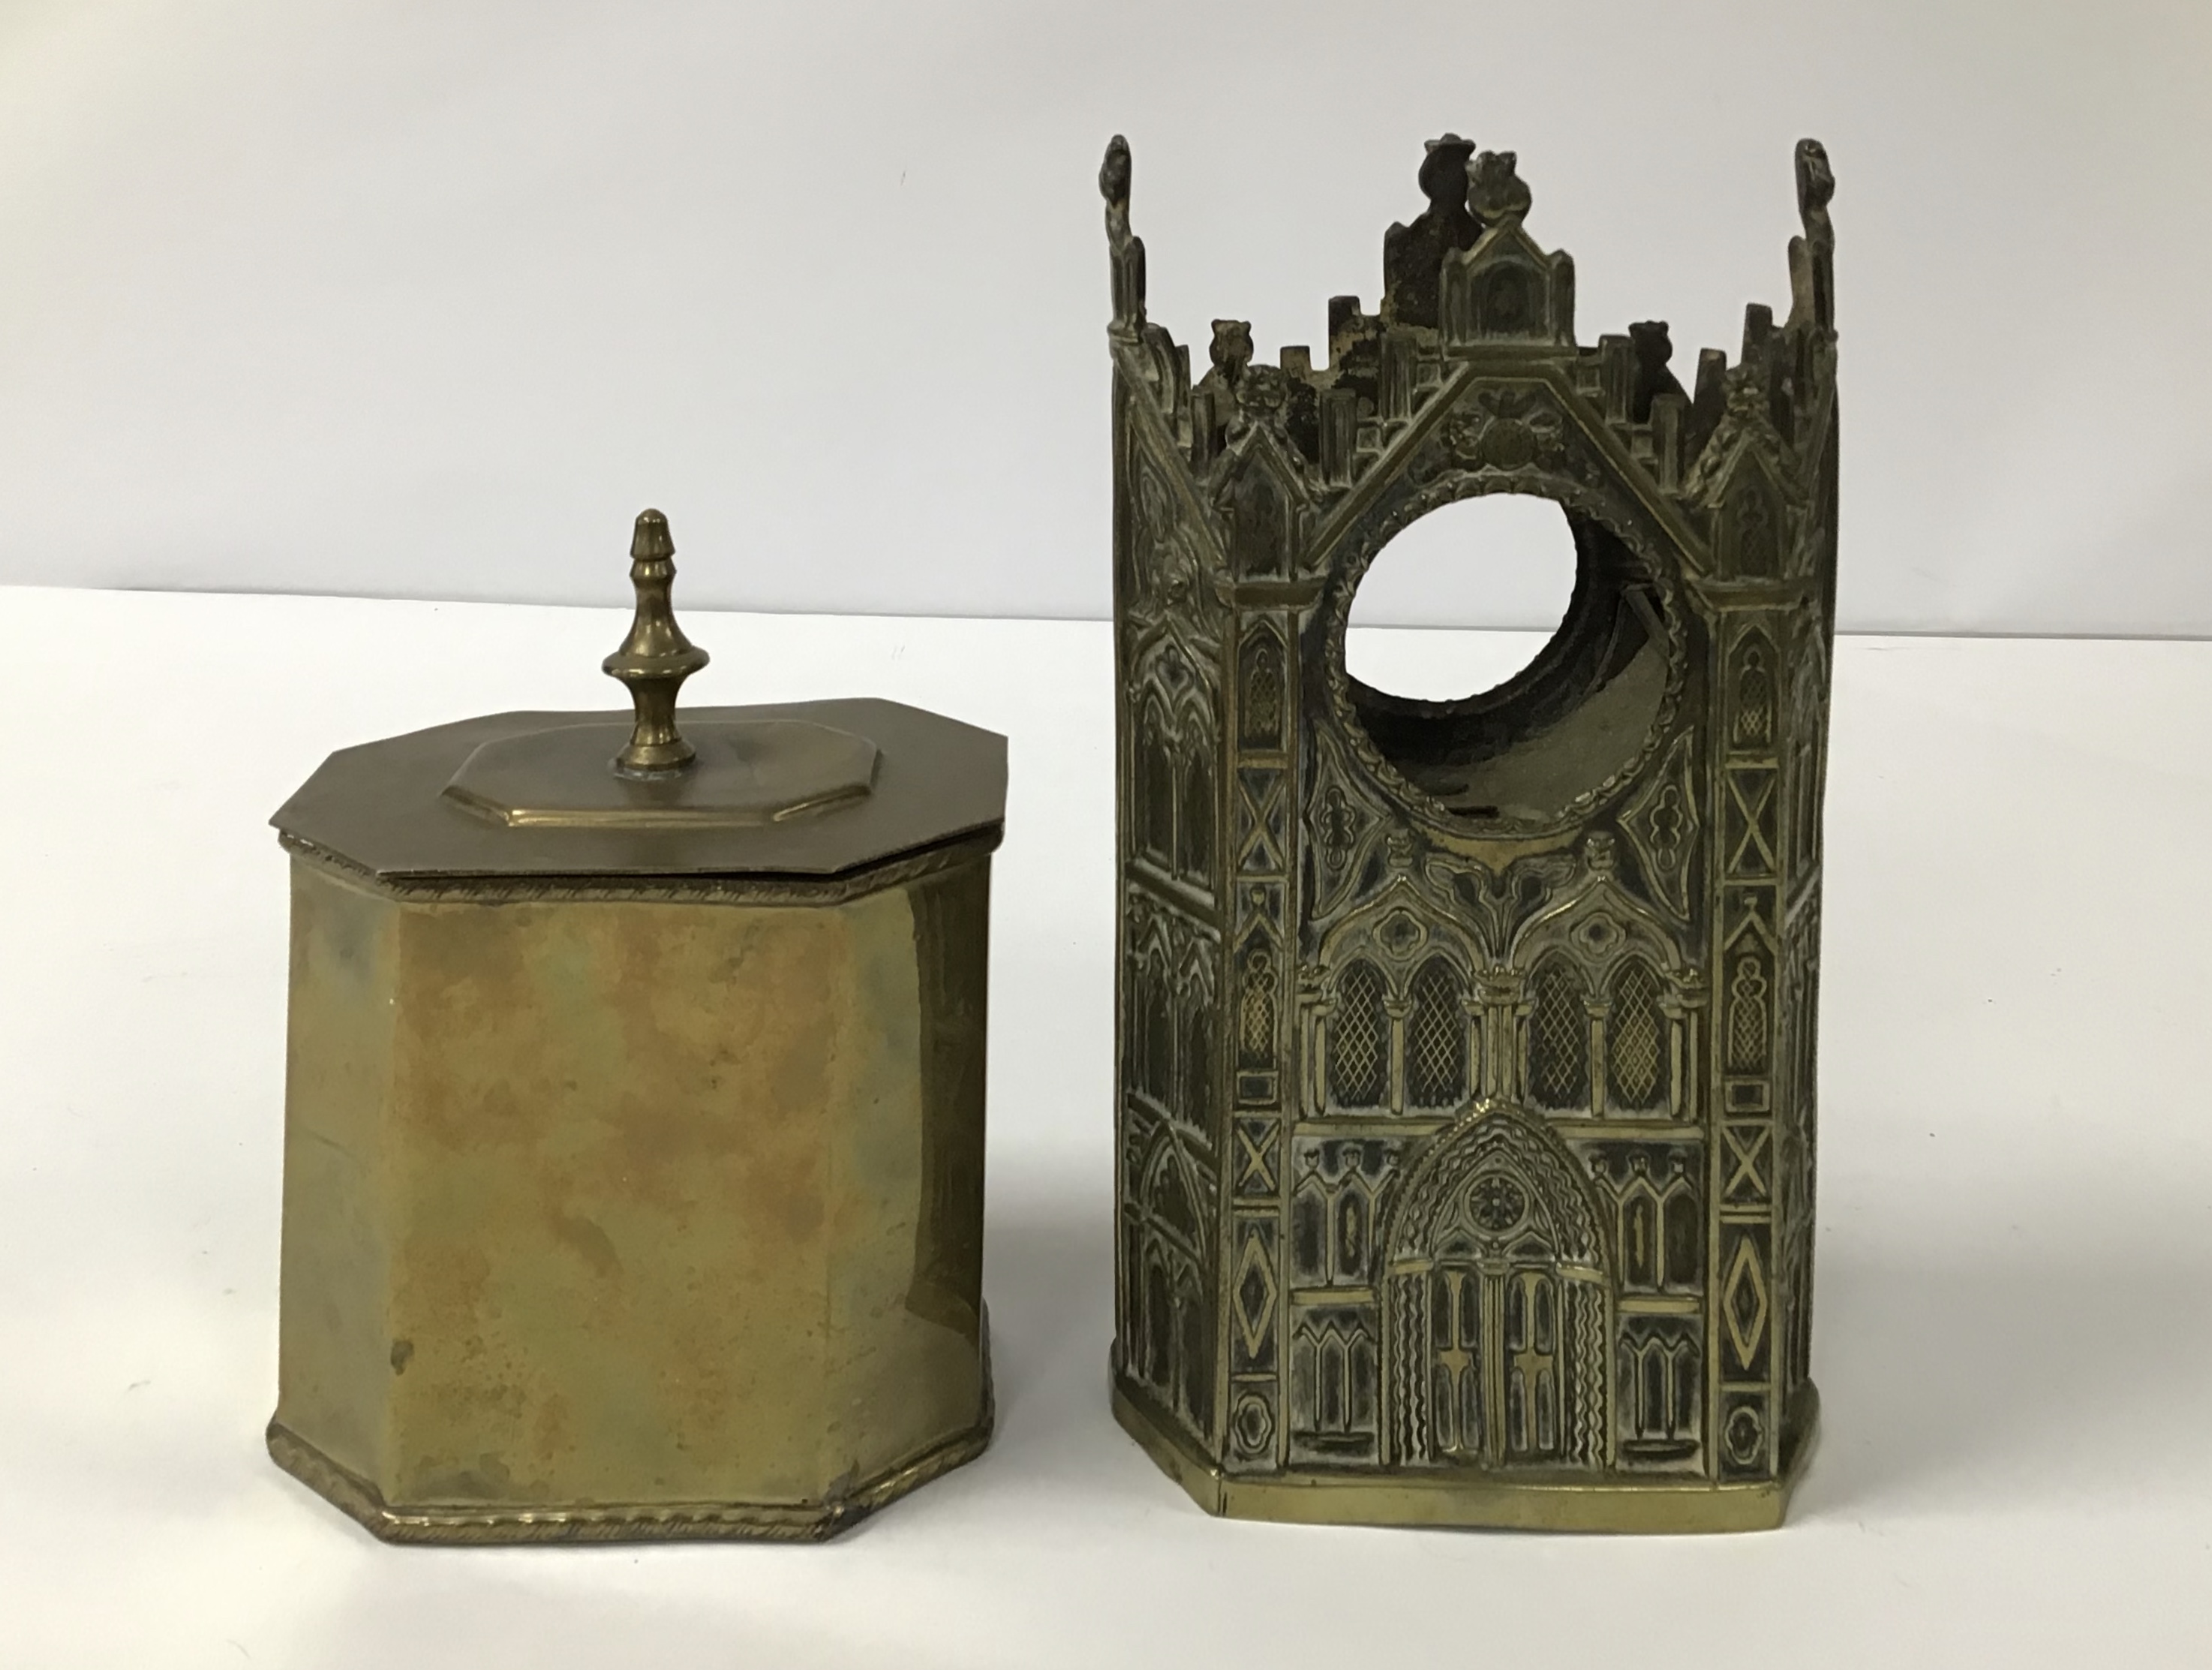 A VICTORIAN BRASS WATCH HOLDER IN THE FORM OF A GOTHIC BUILDING, TOGETHER WITH A BRASS TEA CADDY - Image 4 of 4